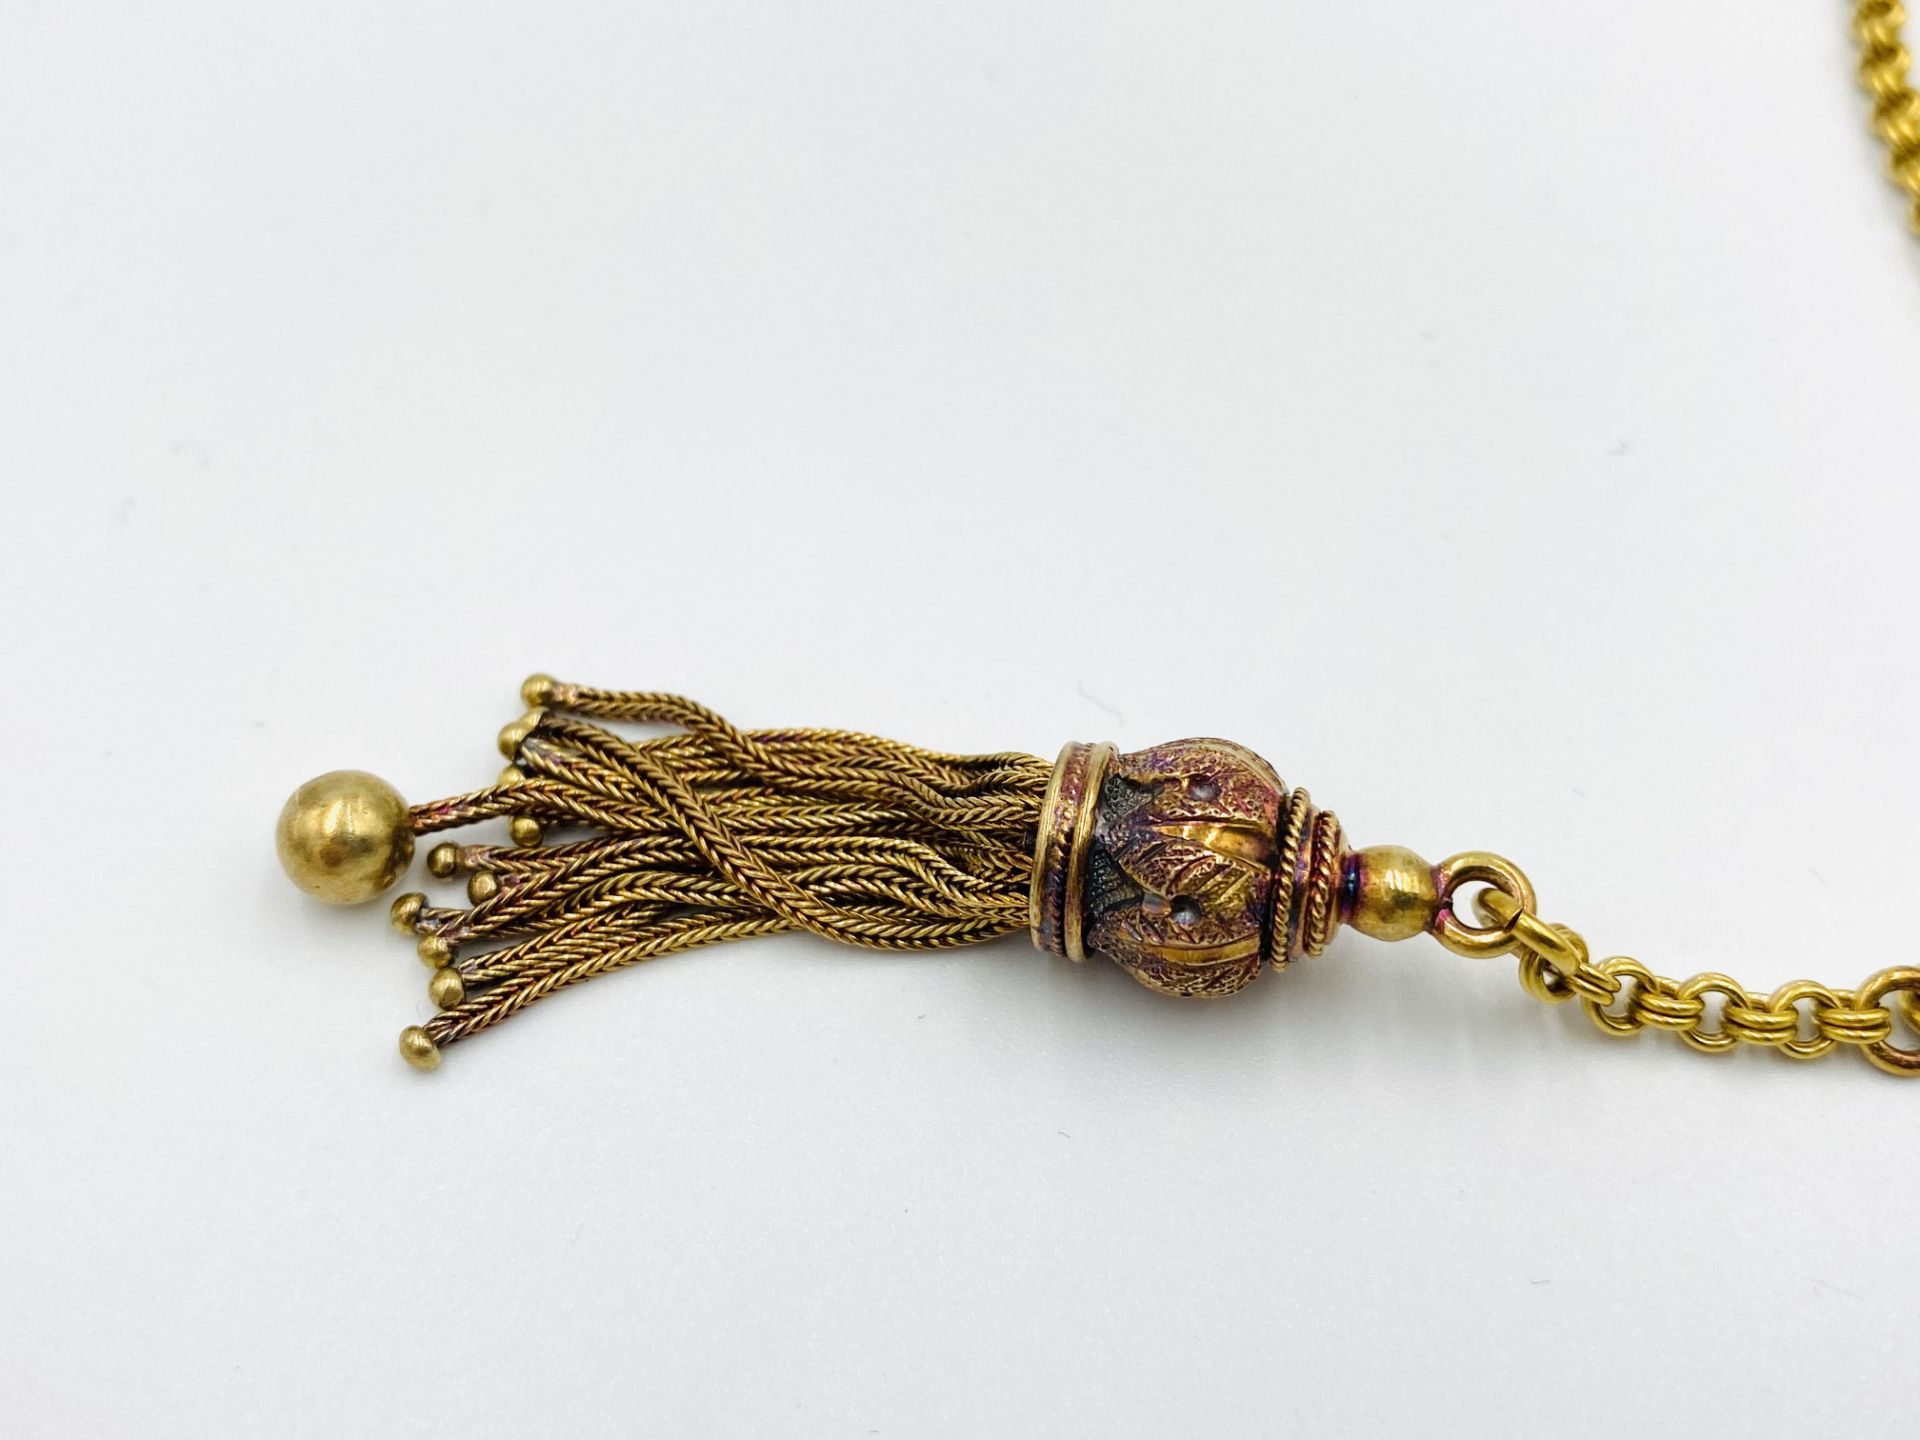 9ct gold necklace with 18ct gold tassel - Image 5 of 5